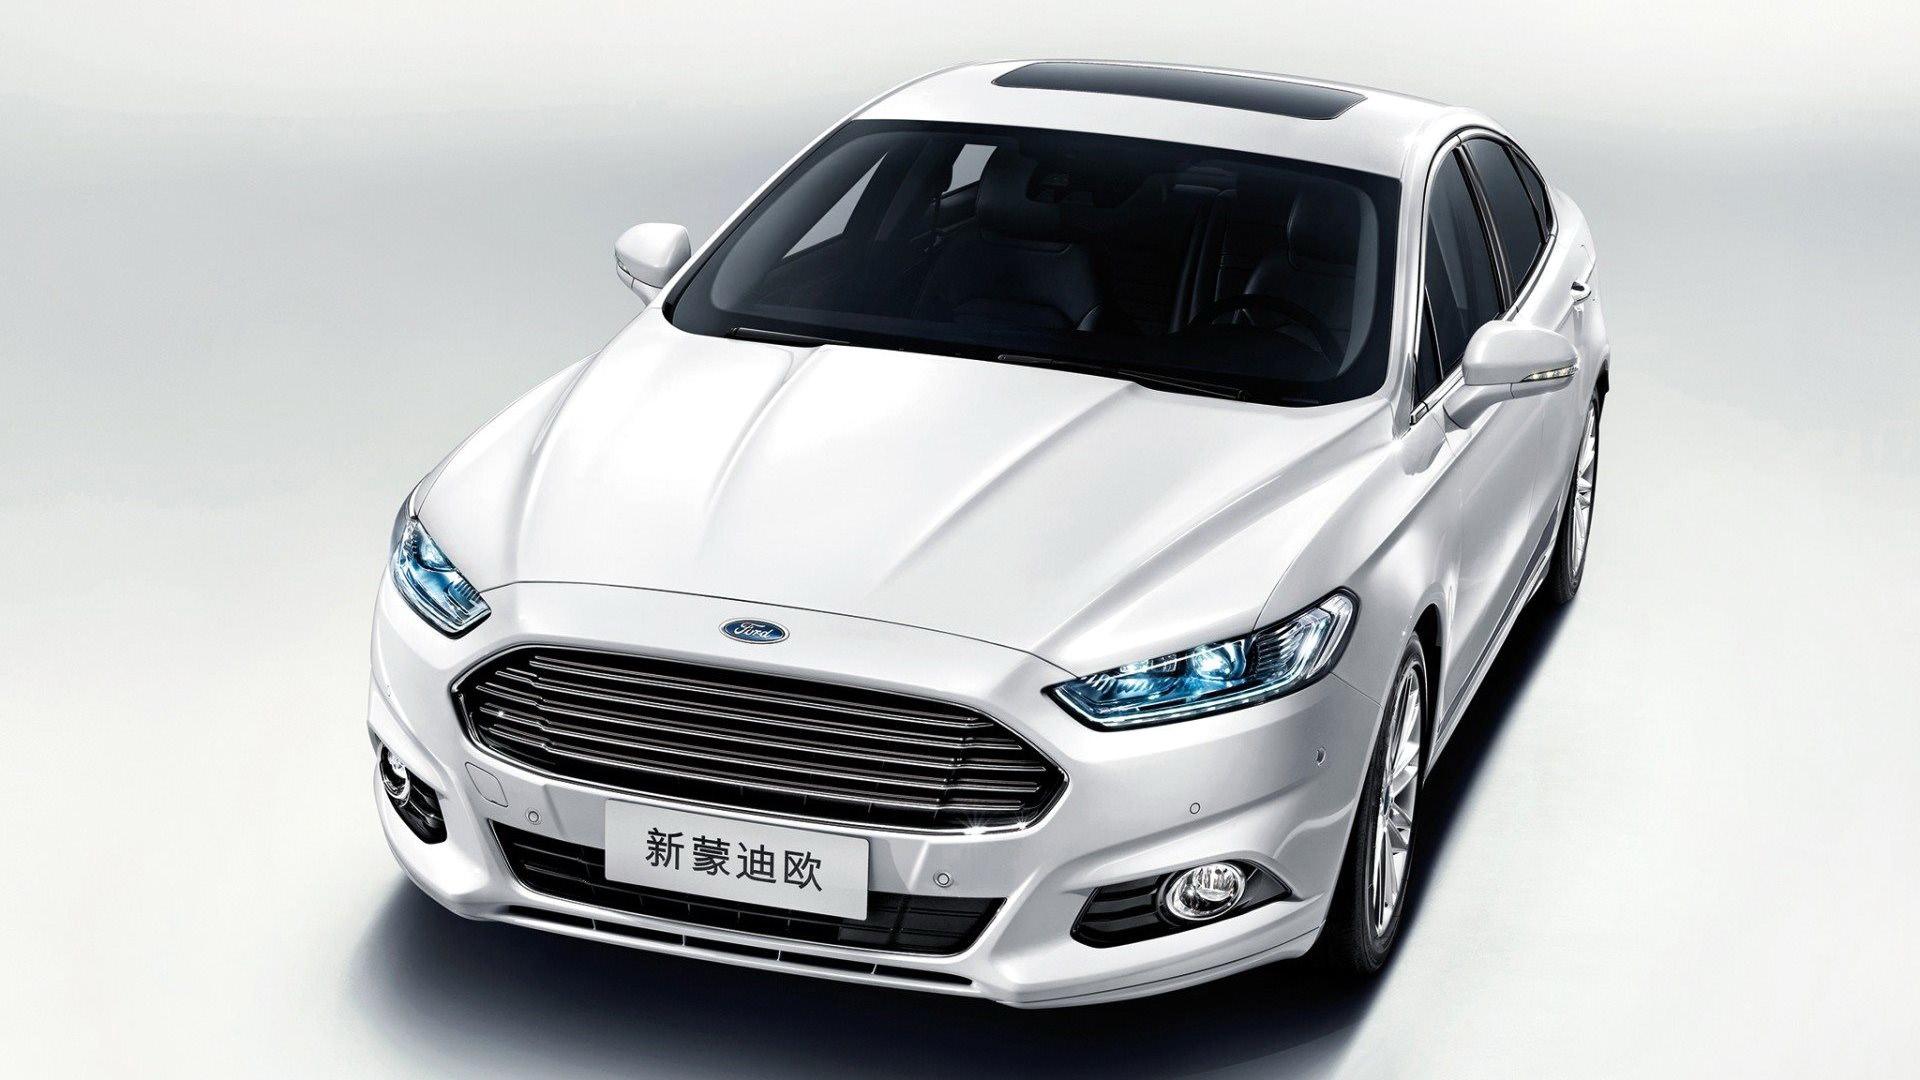 White Ford Mondeo HD Wallpaper. Car Picture Website